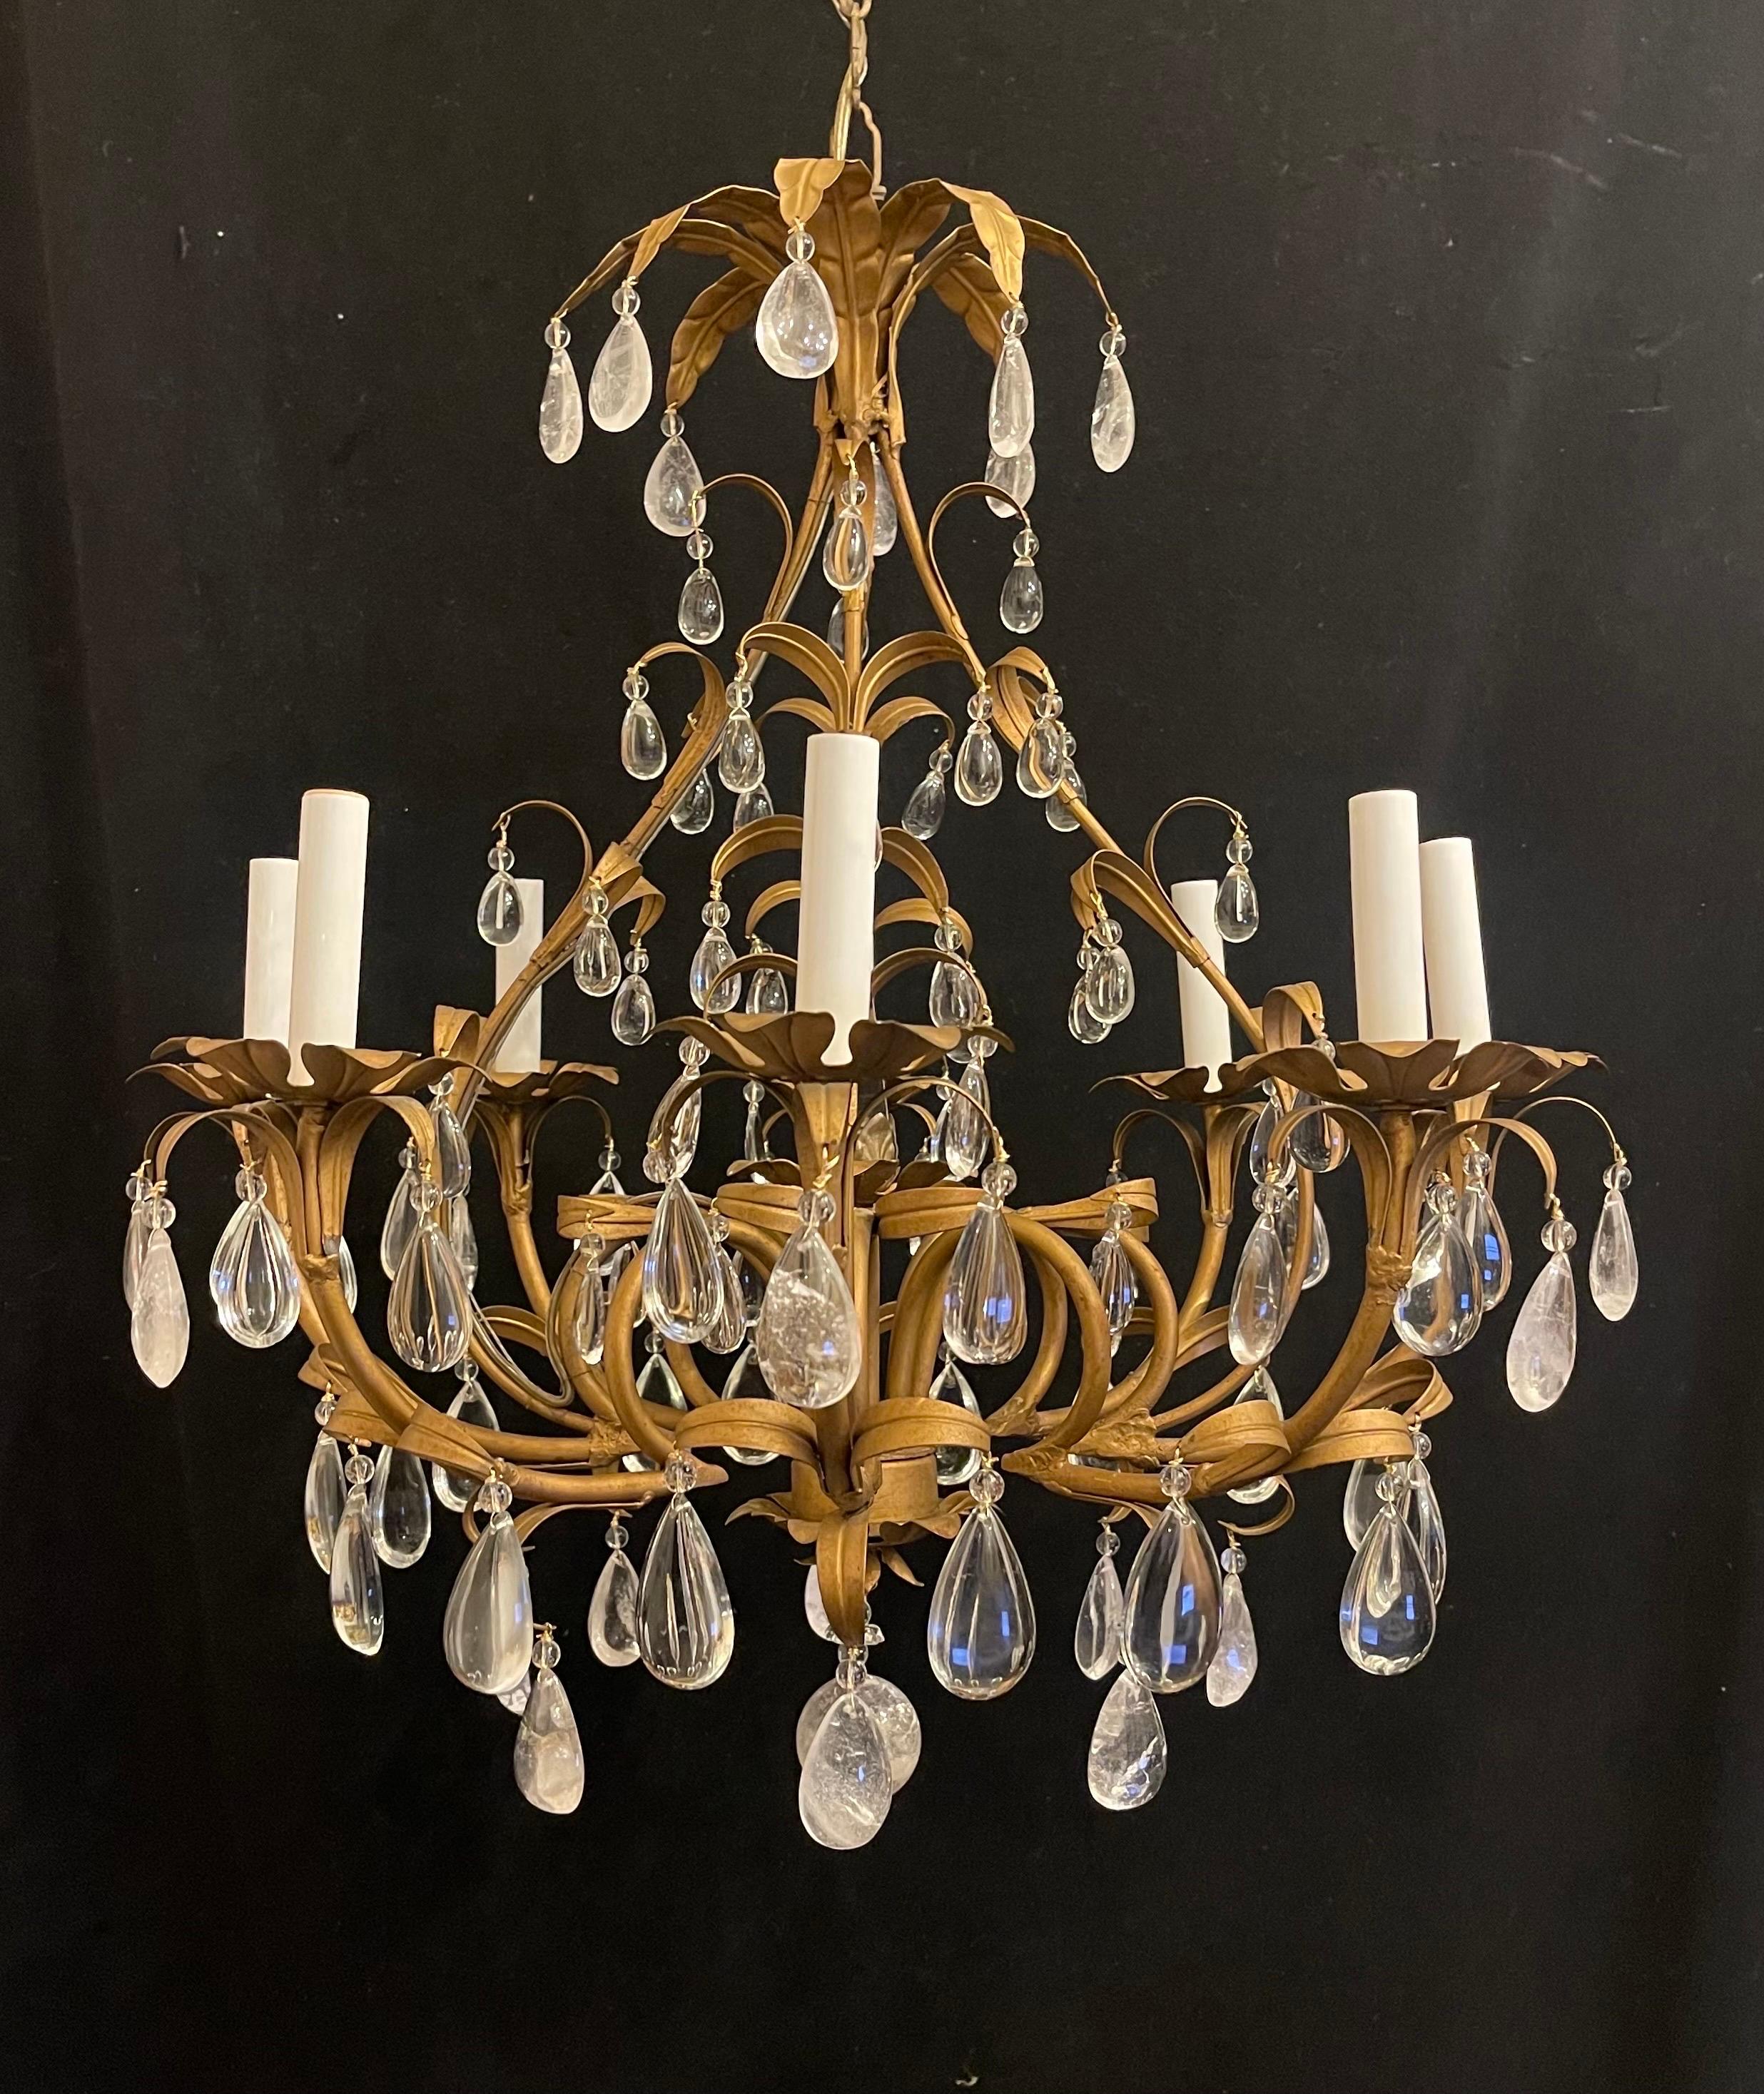 A Wonderful Petite Eight Candelabra Light Maison Baguès Style Rock Crystal / Crystal Alternating Drop With Beads Gold Gilt Tole French Chandelier
Wiring Has Been Updated, Comes With Chain Canopy And Mounting Hardware.